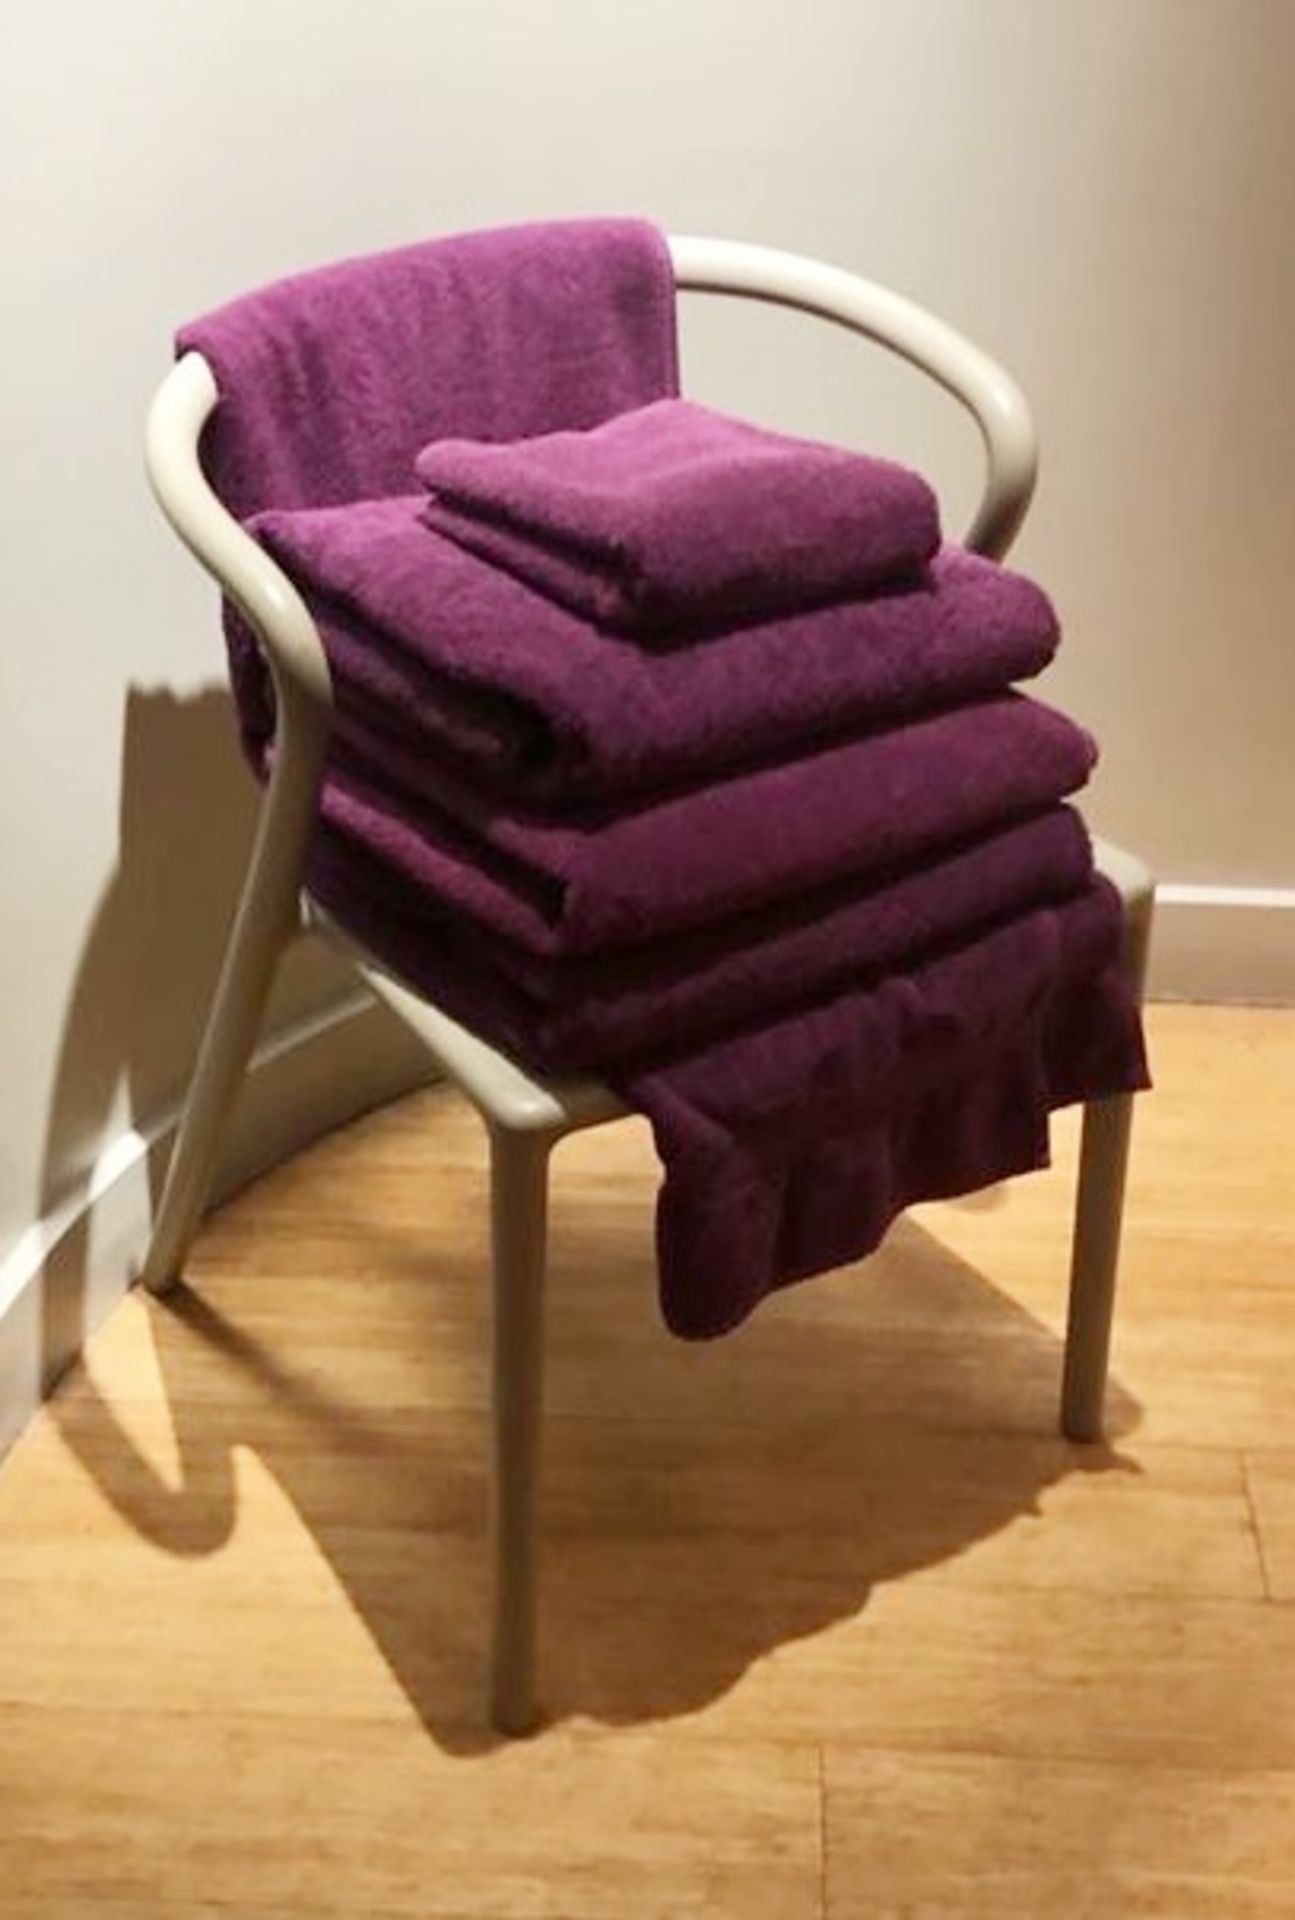 50 x Majestic Luxury 620gsm Bath Towels in Purple - Sizes Include Large, Medium and Small - - Image 4 of 4